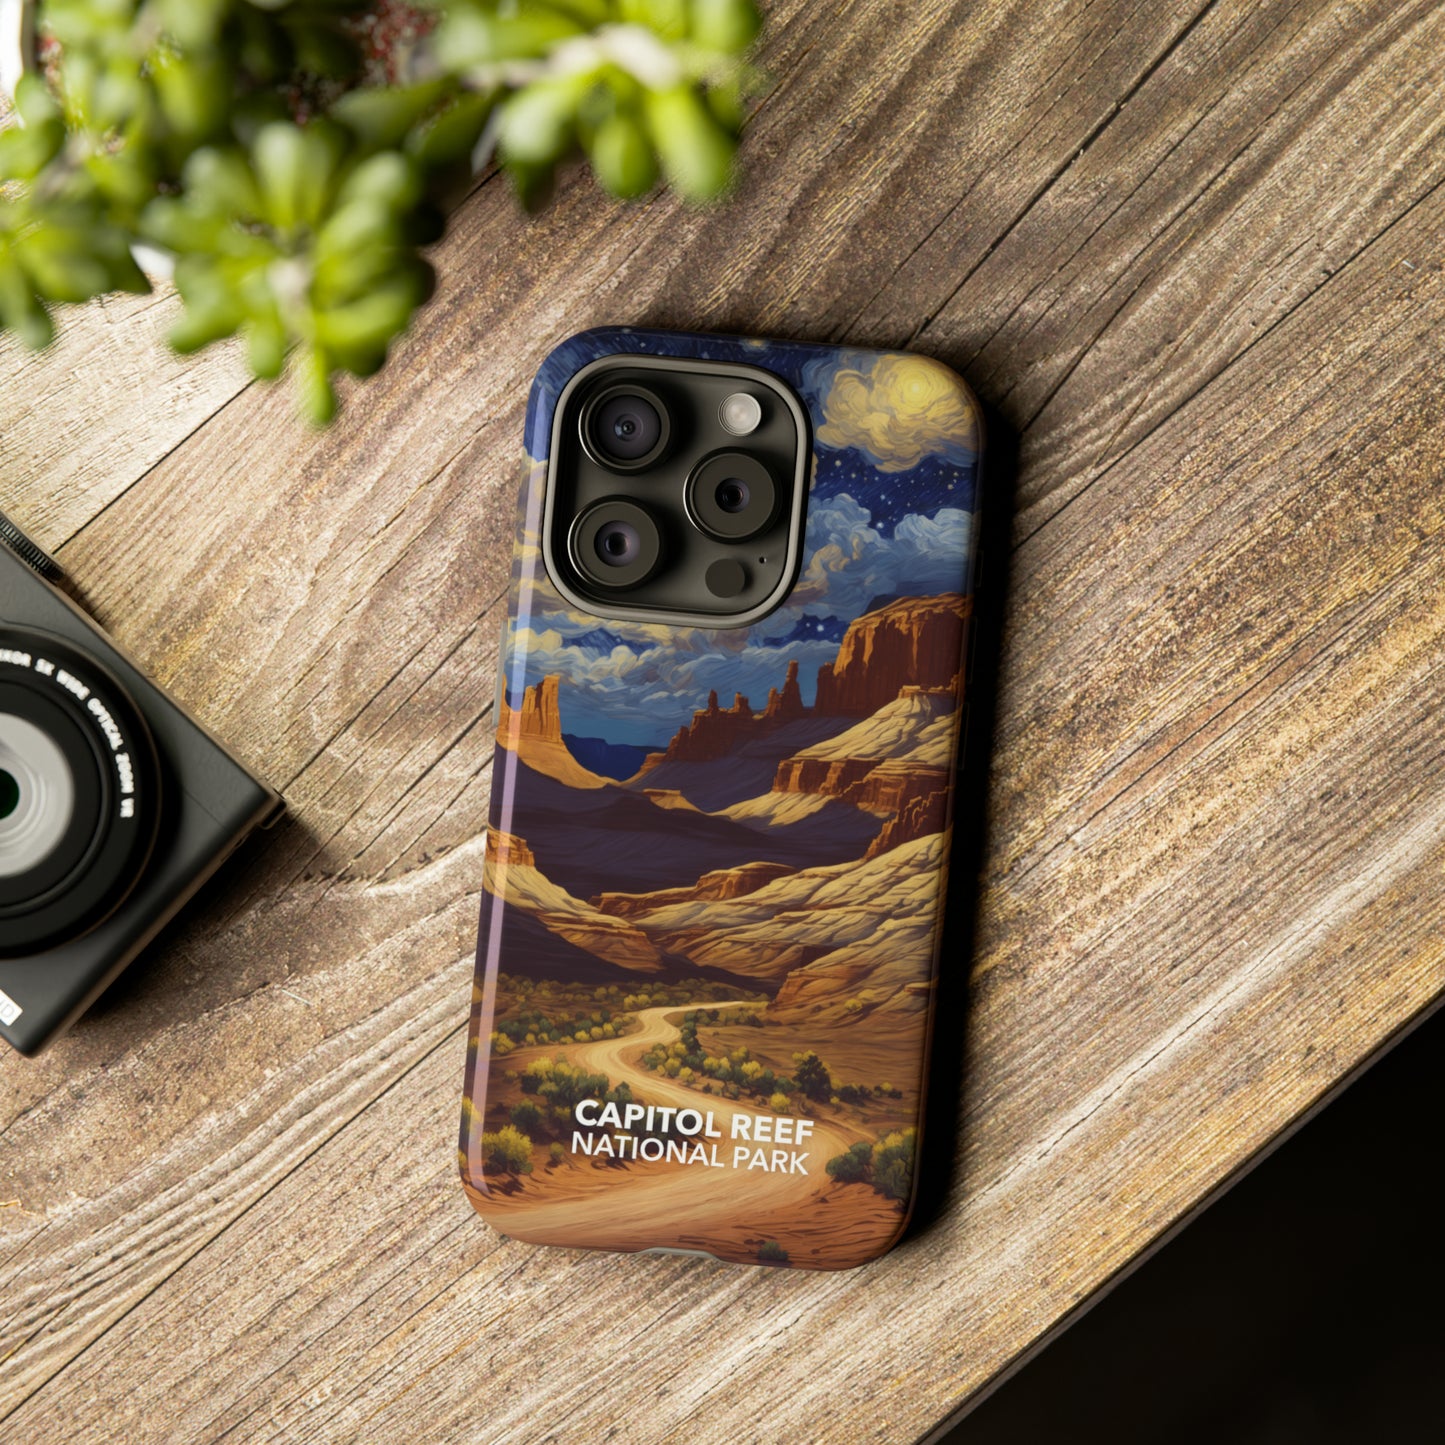 Capitol Reef National Park Phone Case - Starry Night